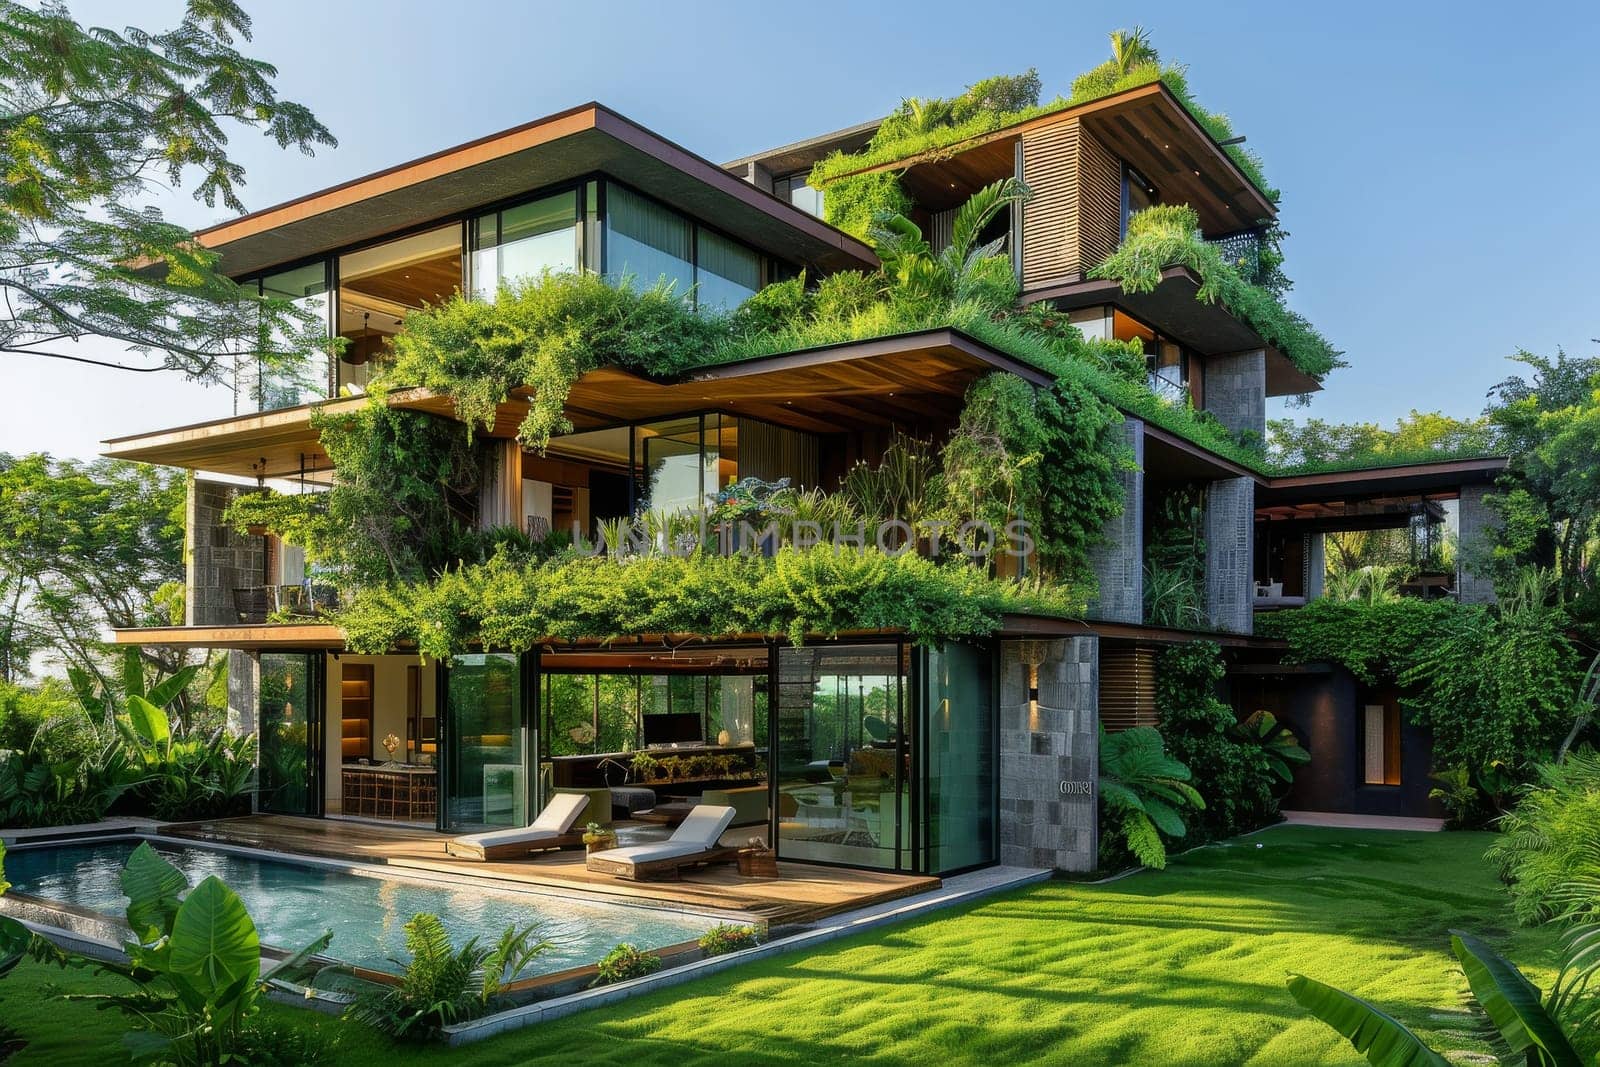 A large house with a green roof and a lush garden.